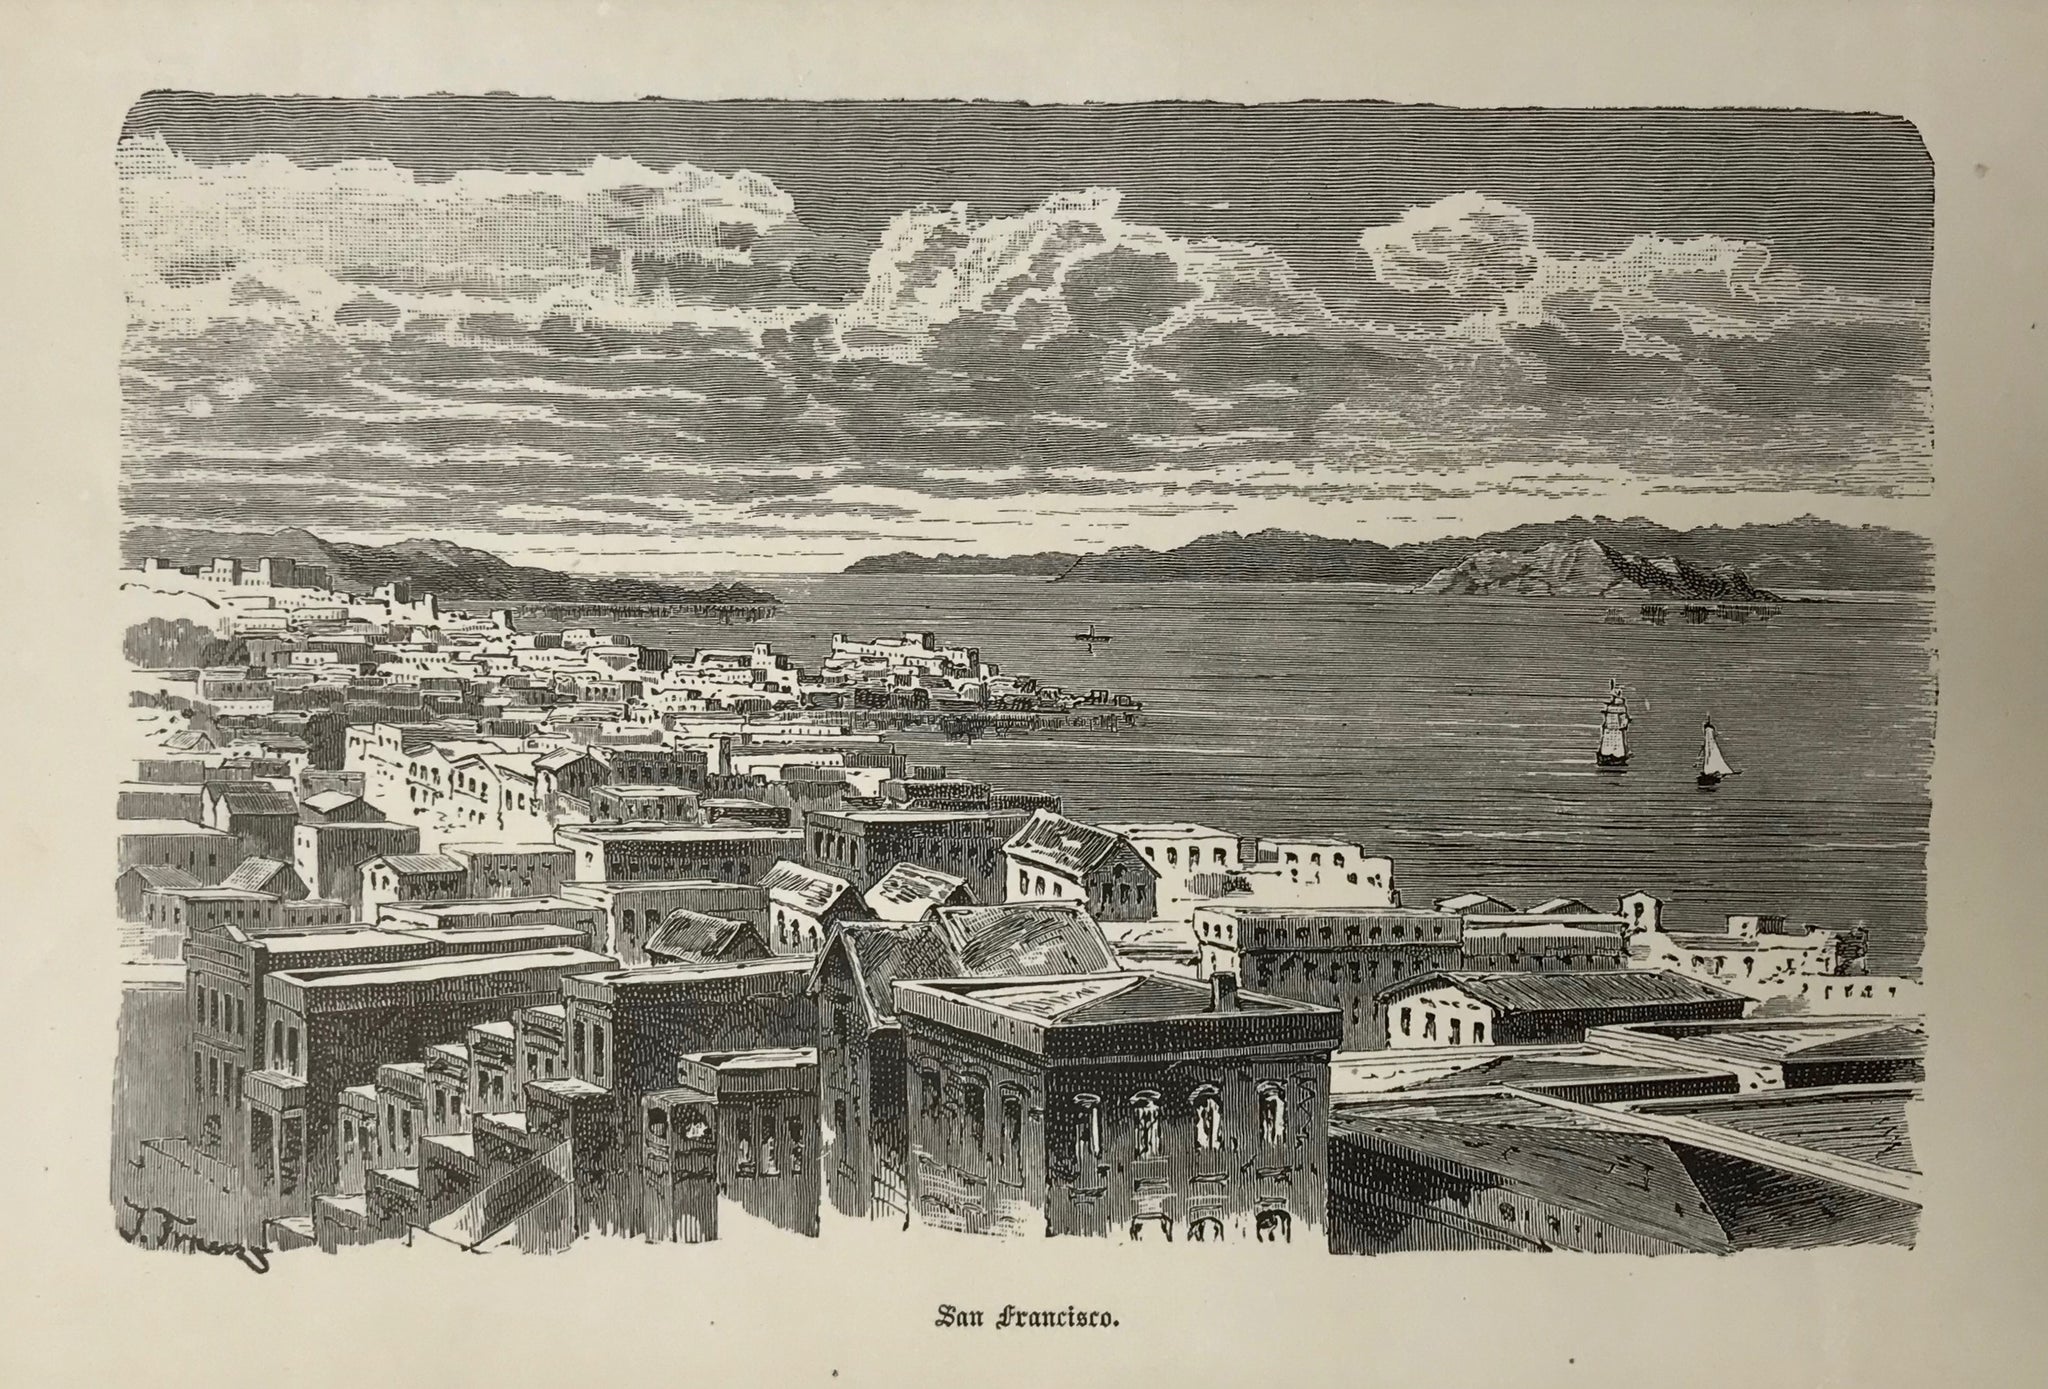 "San Francisco"  Wood engraving printed in light beige on white background 1877.